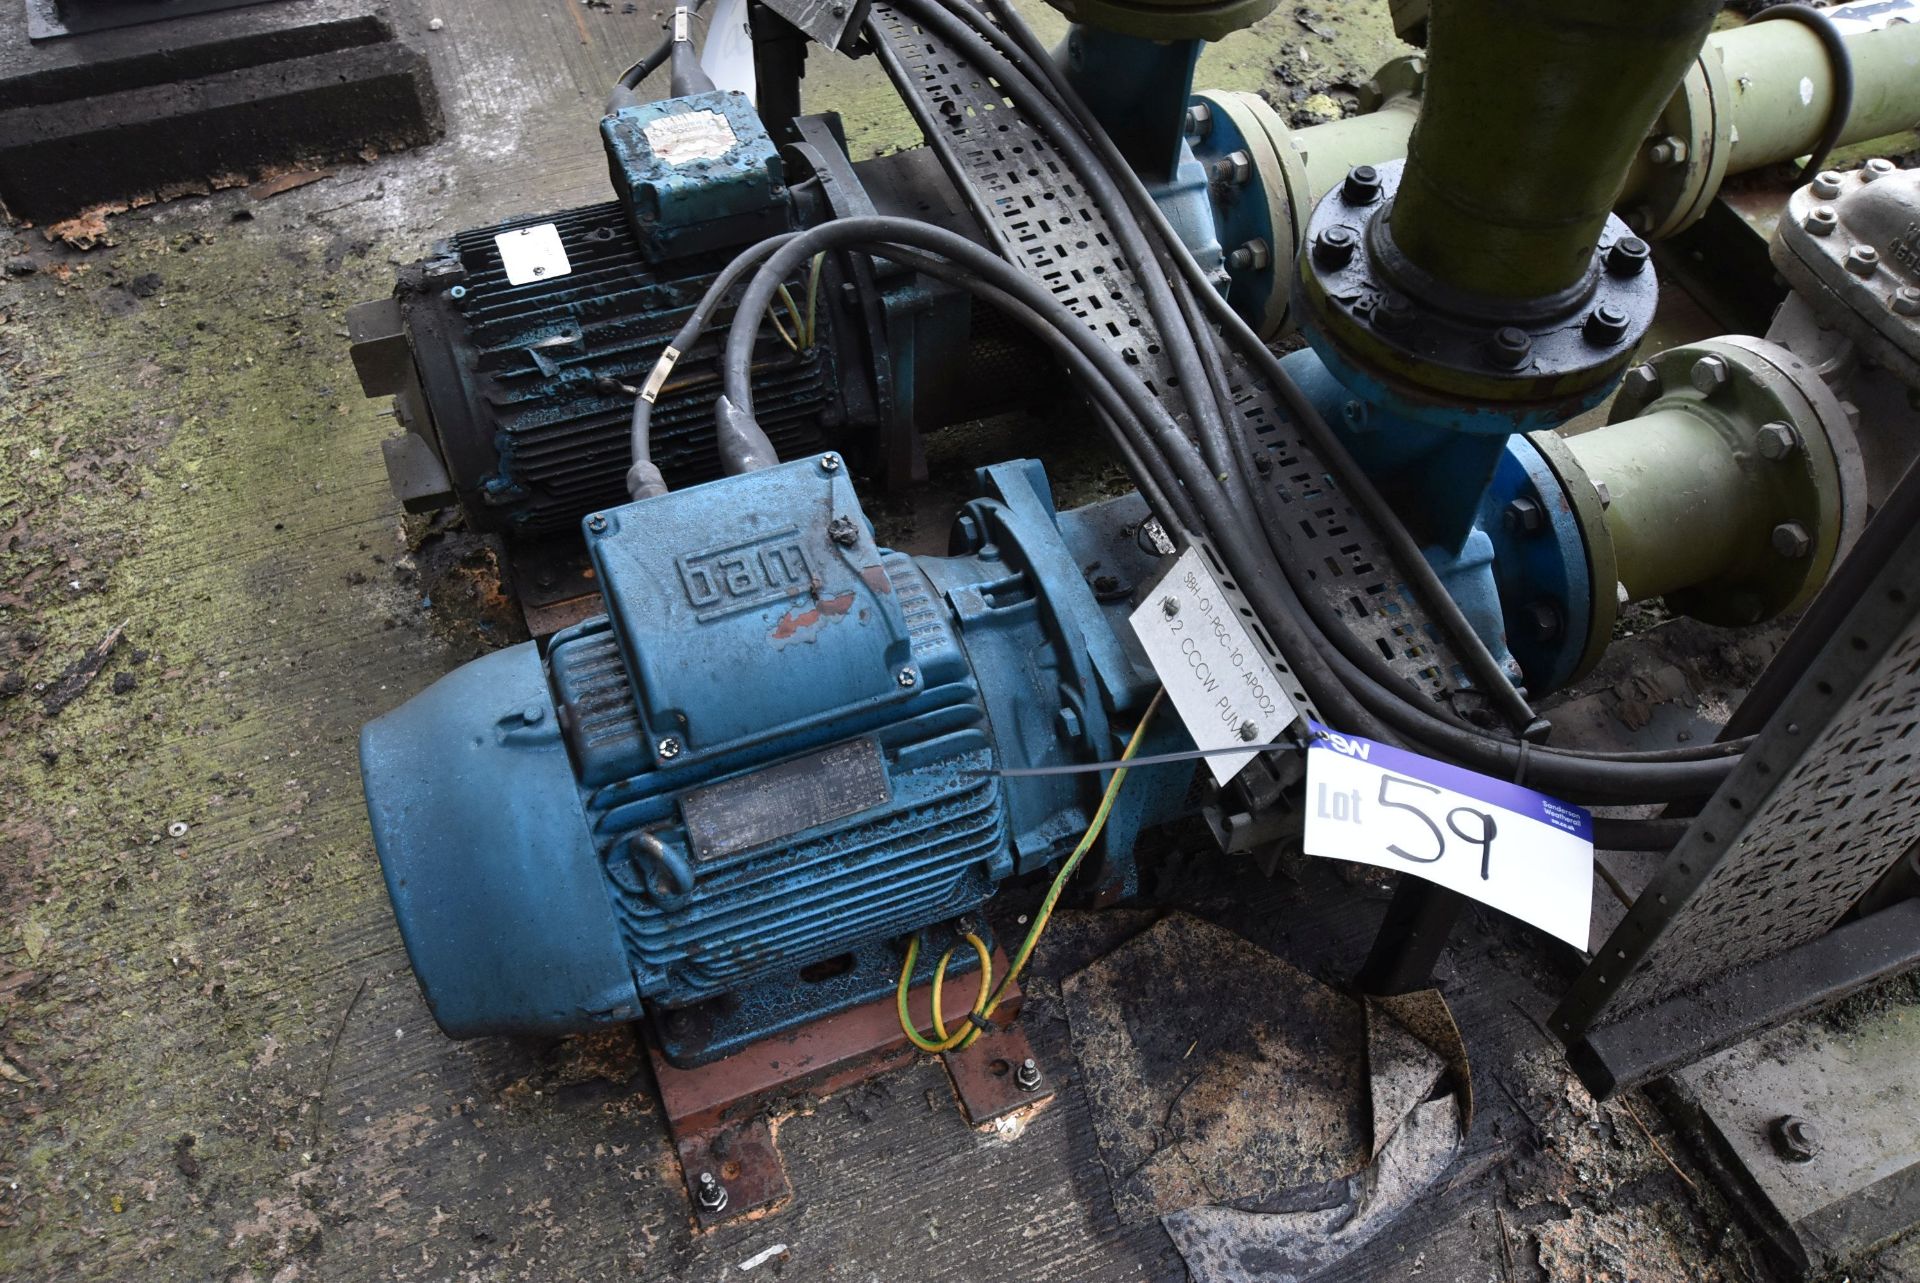 Weir HC150-125-250 Centrifugal Pump, serial no. 32226333.01.001, with 15kW electric motor and two